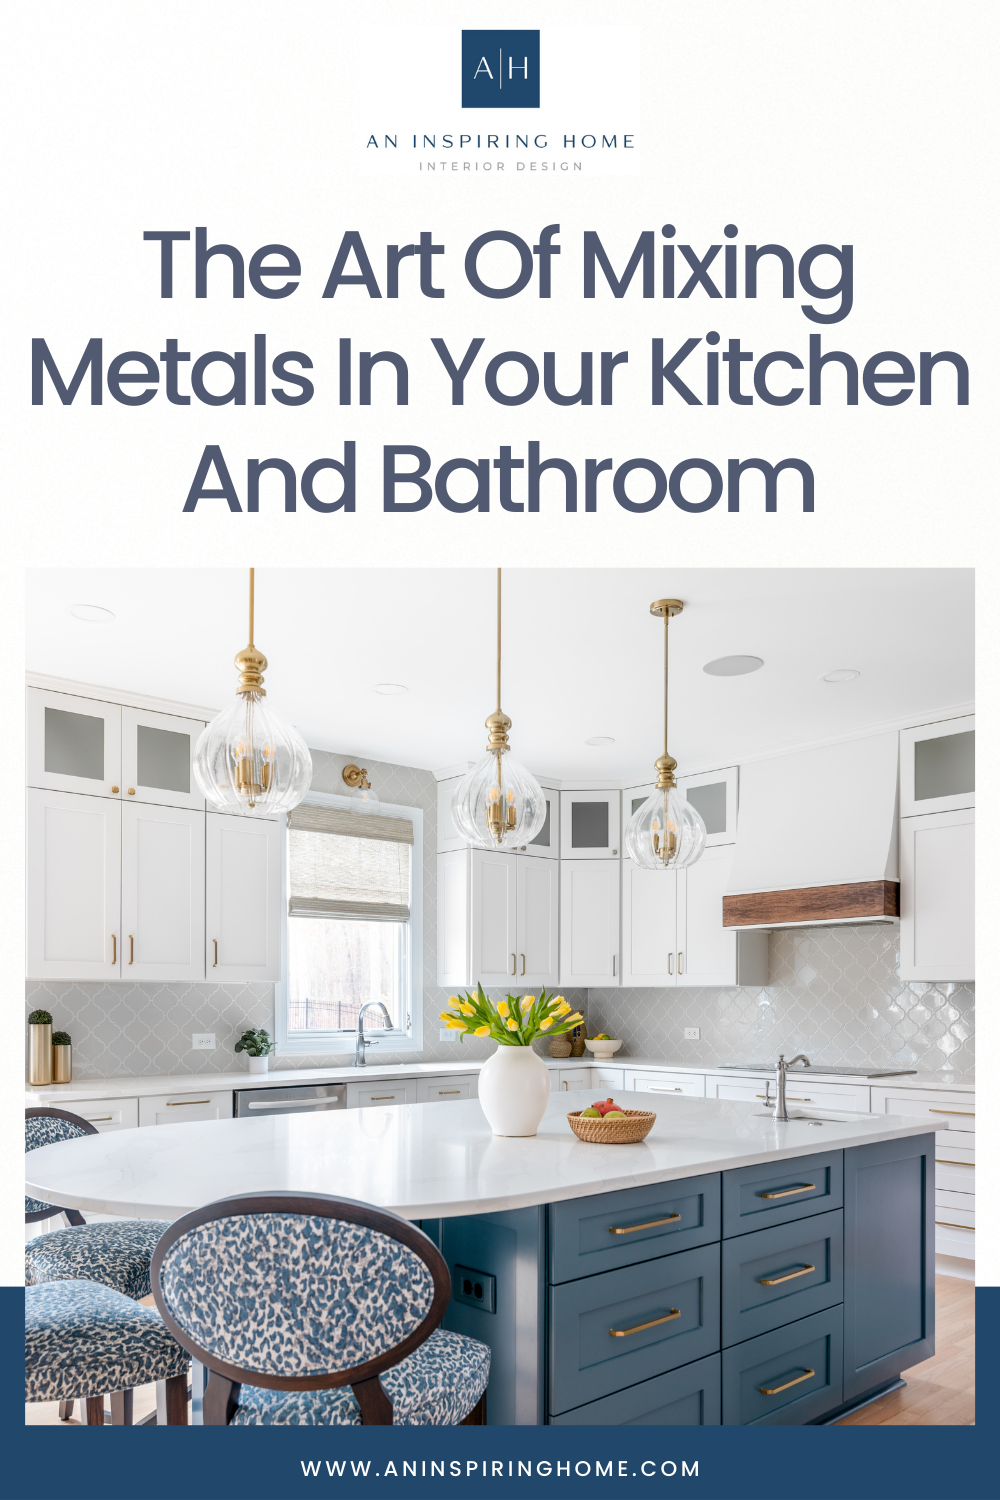 The Art Of Mixing Metals In Your Kitchen And Bathroom